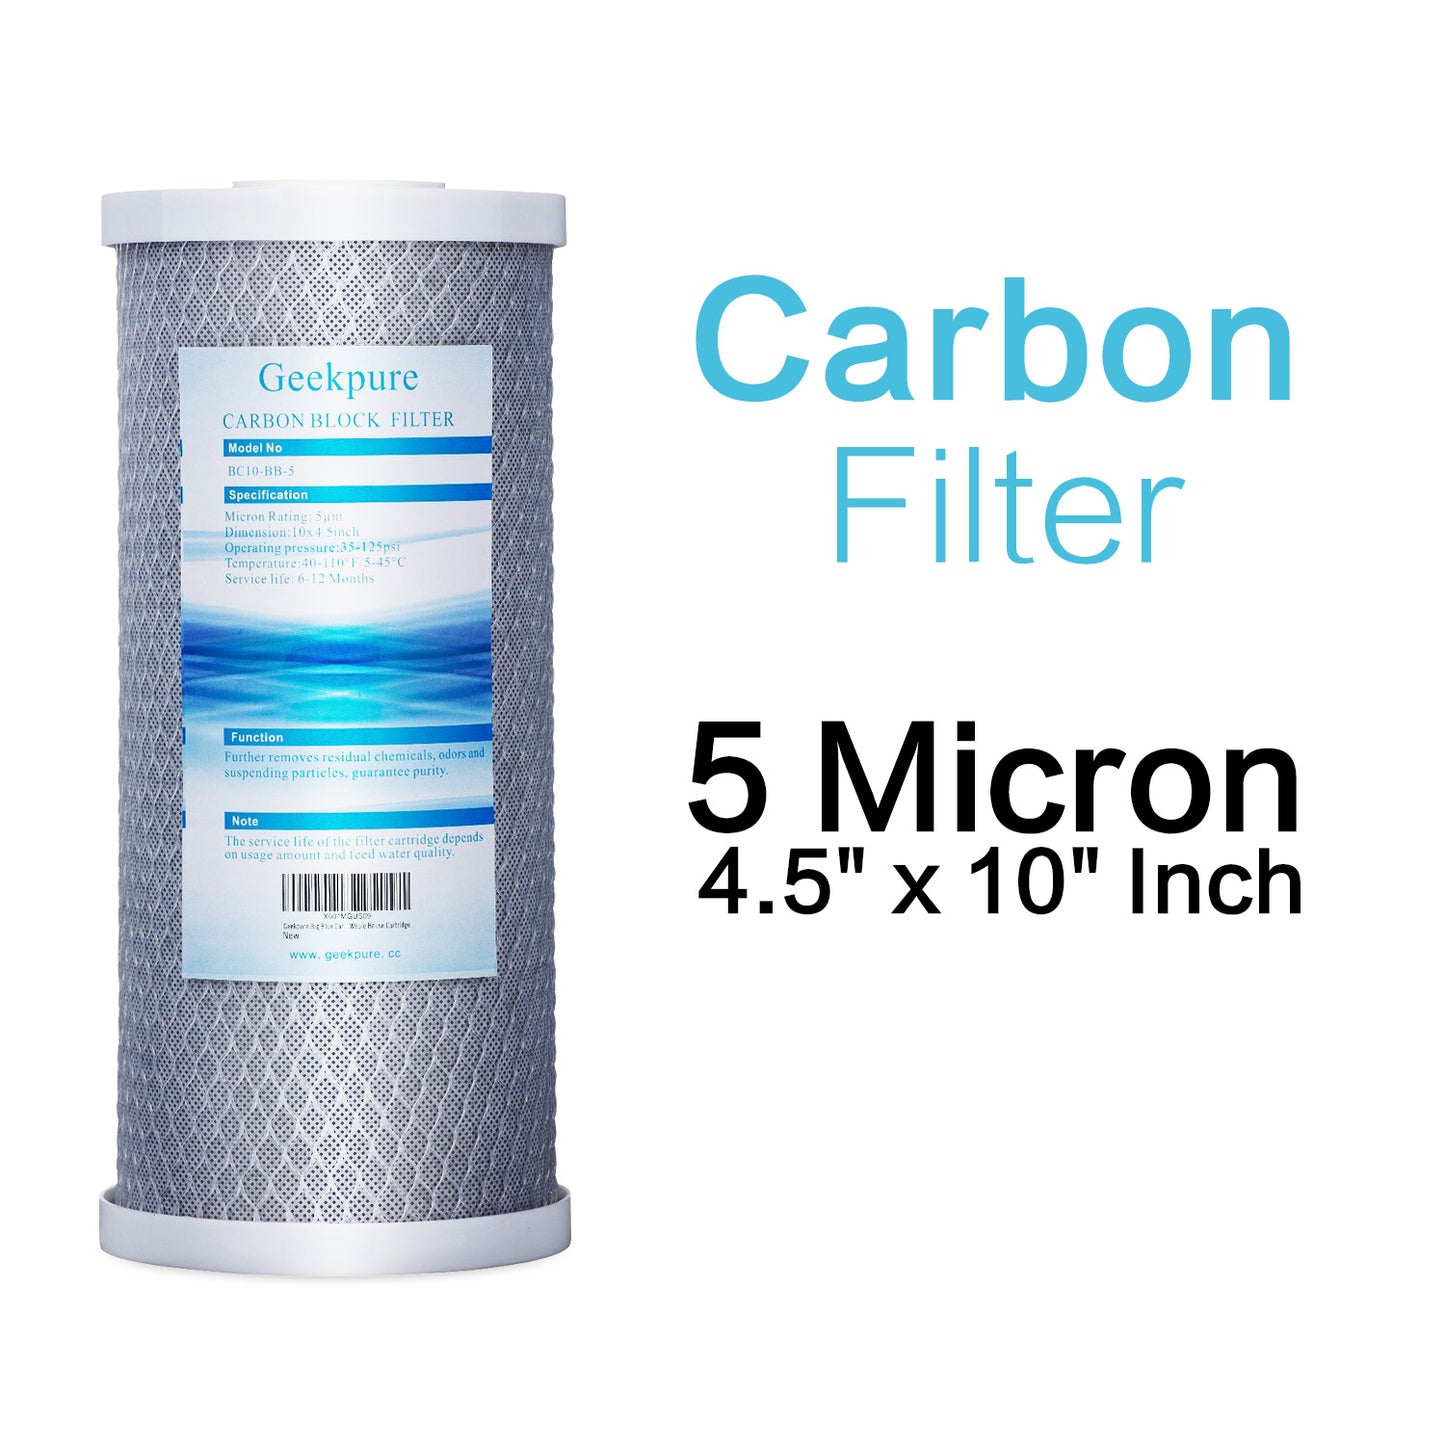 4.5"x 10" Carbon Block Filters for Whole House Water Filtration -Pack 4